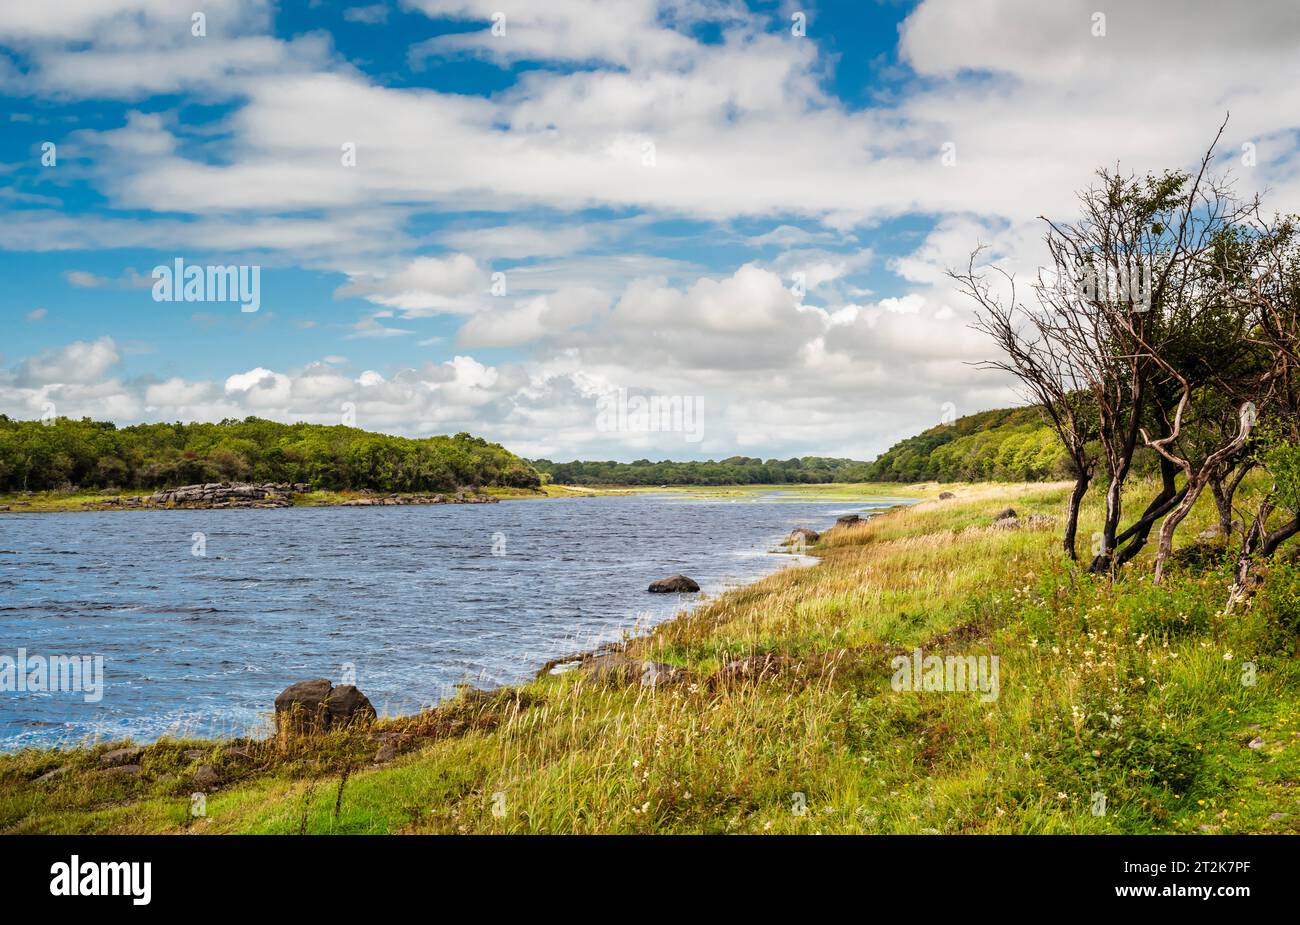 The lake at Coole Park Nature Reserve, is part of a system of ephemeral lakes or turloughs in the karst landscape west of Gort, County Galway Stock Photo